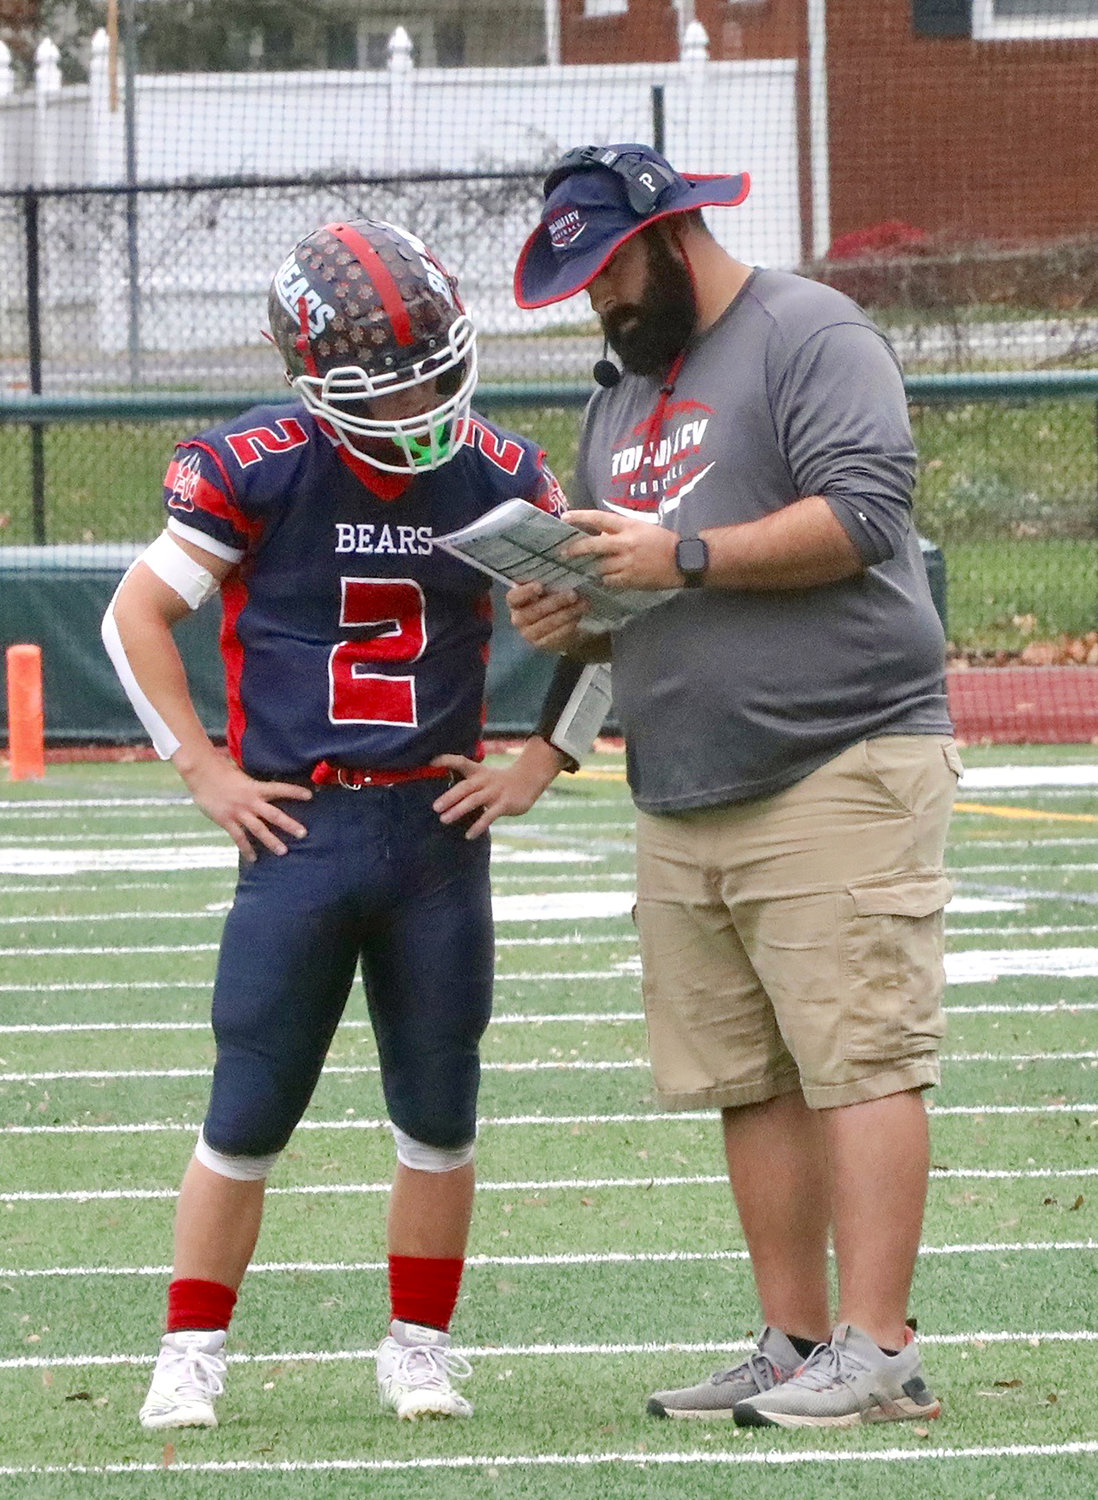 Preparation before each games is one of Coach Crudele’s keys for success. Film study and building plans around his players helped the team raise the Section IX 8-man trophy this year. The pair of Quarterback Austin Hartman and Head Coach Kevin Crudele both earned Sullivan County Democrat awards for their successful season.